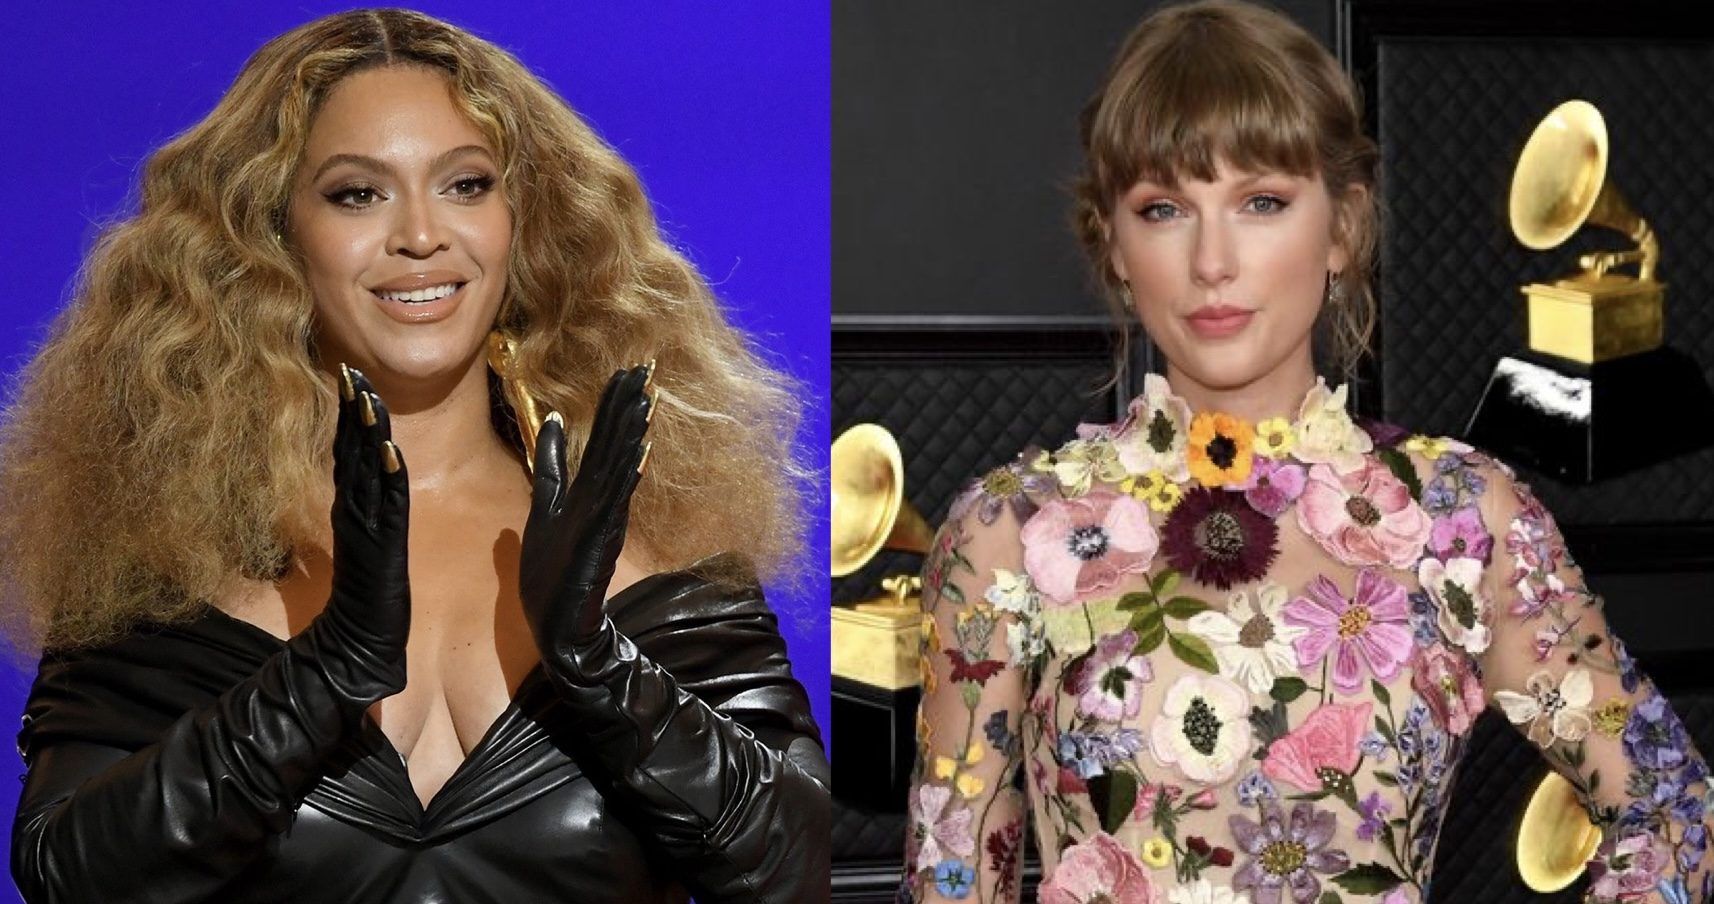 Beyoncé and Taylor Swift at the 2021 Grammy Awards